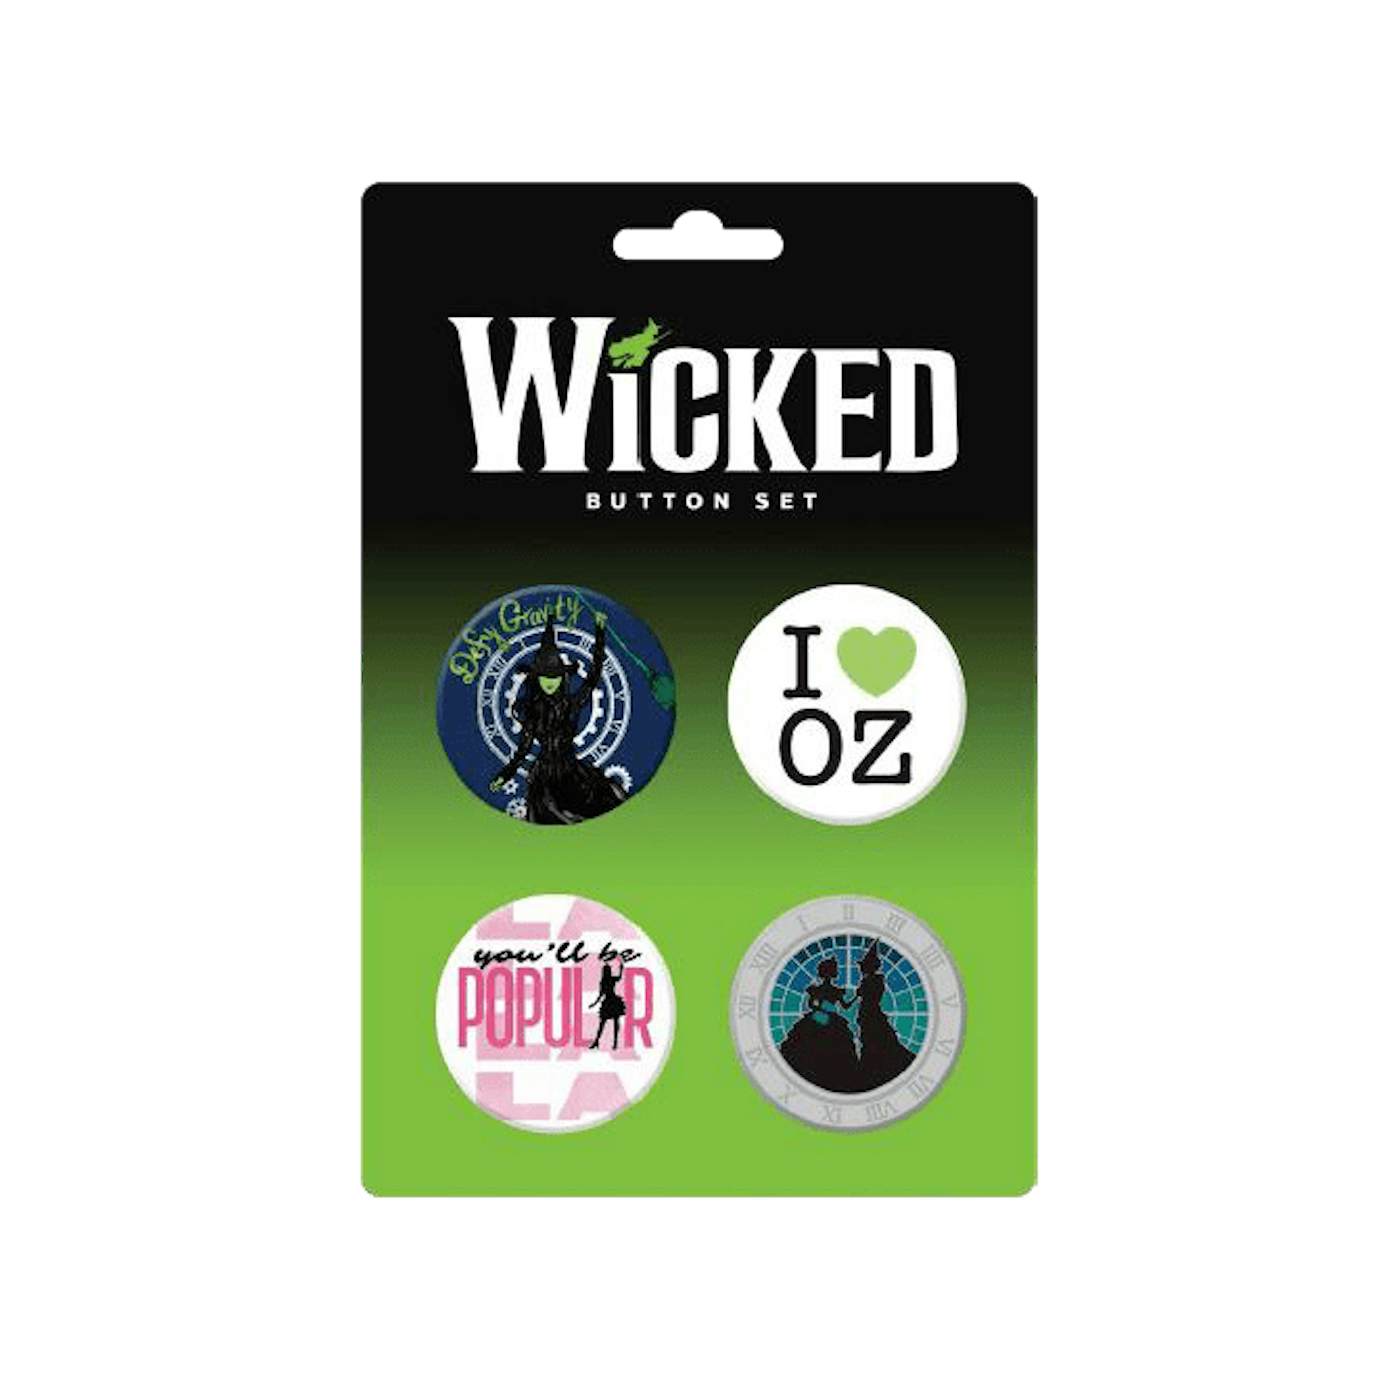 WICKED The Musical BROADWAY SHOW UNISEX CLOCK TEE new!! OFFICIAL MERCHANDISE